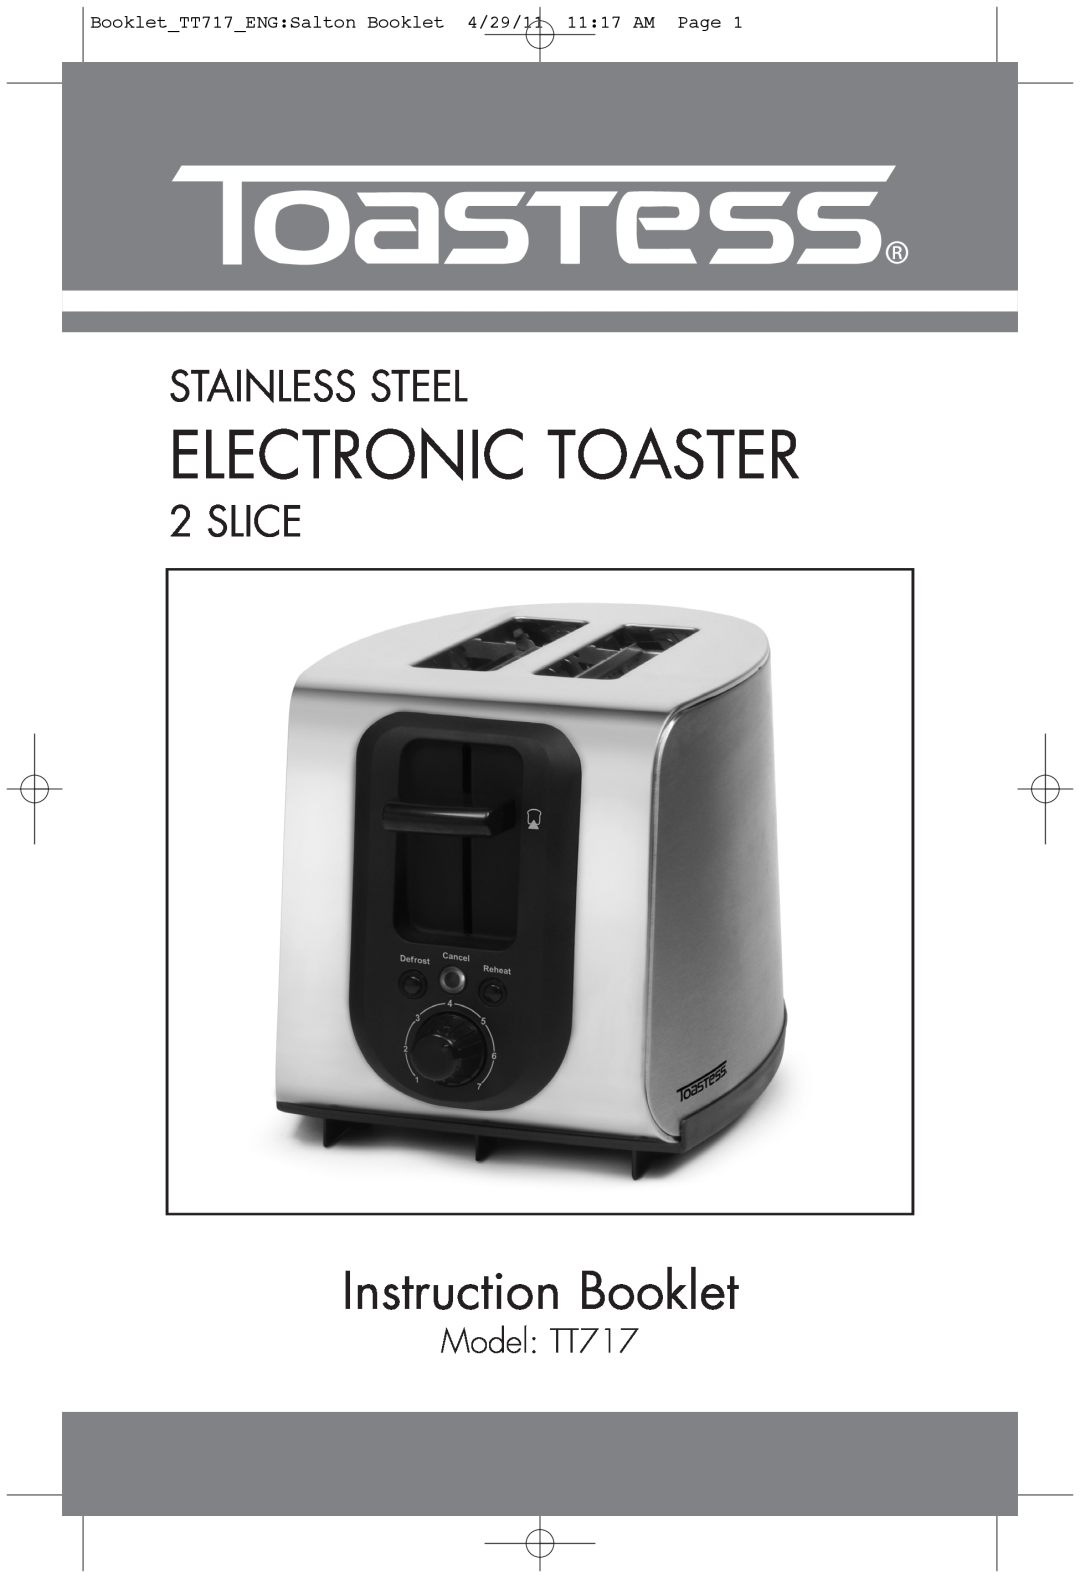 Toastess manual Electronic Toaster, Instruction Booklet, Stainless Steel, Slice, Model TT717 